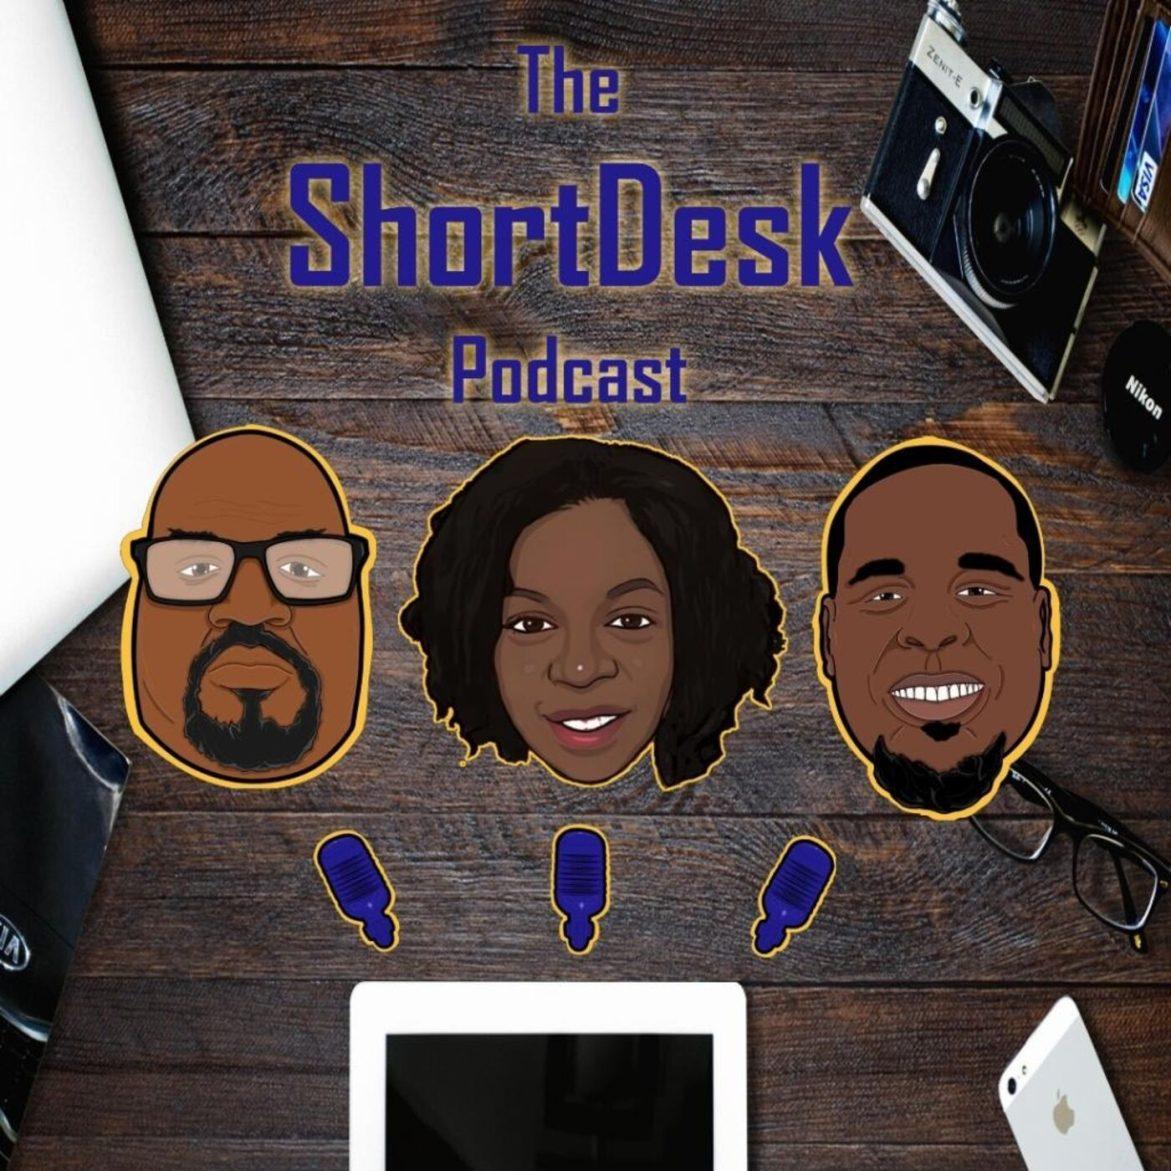 Black Podcasting - Why Did They Cross His Legs Like That ????